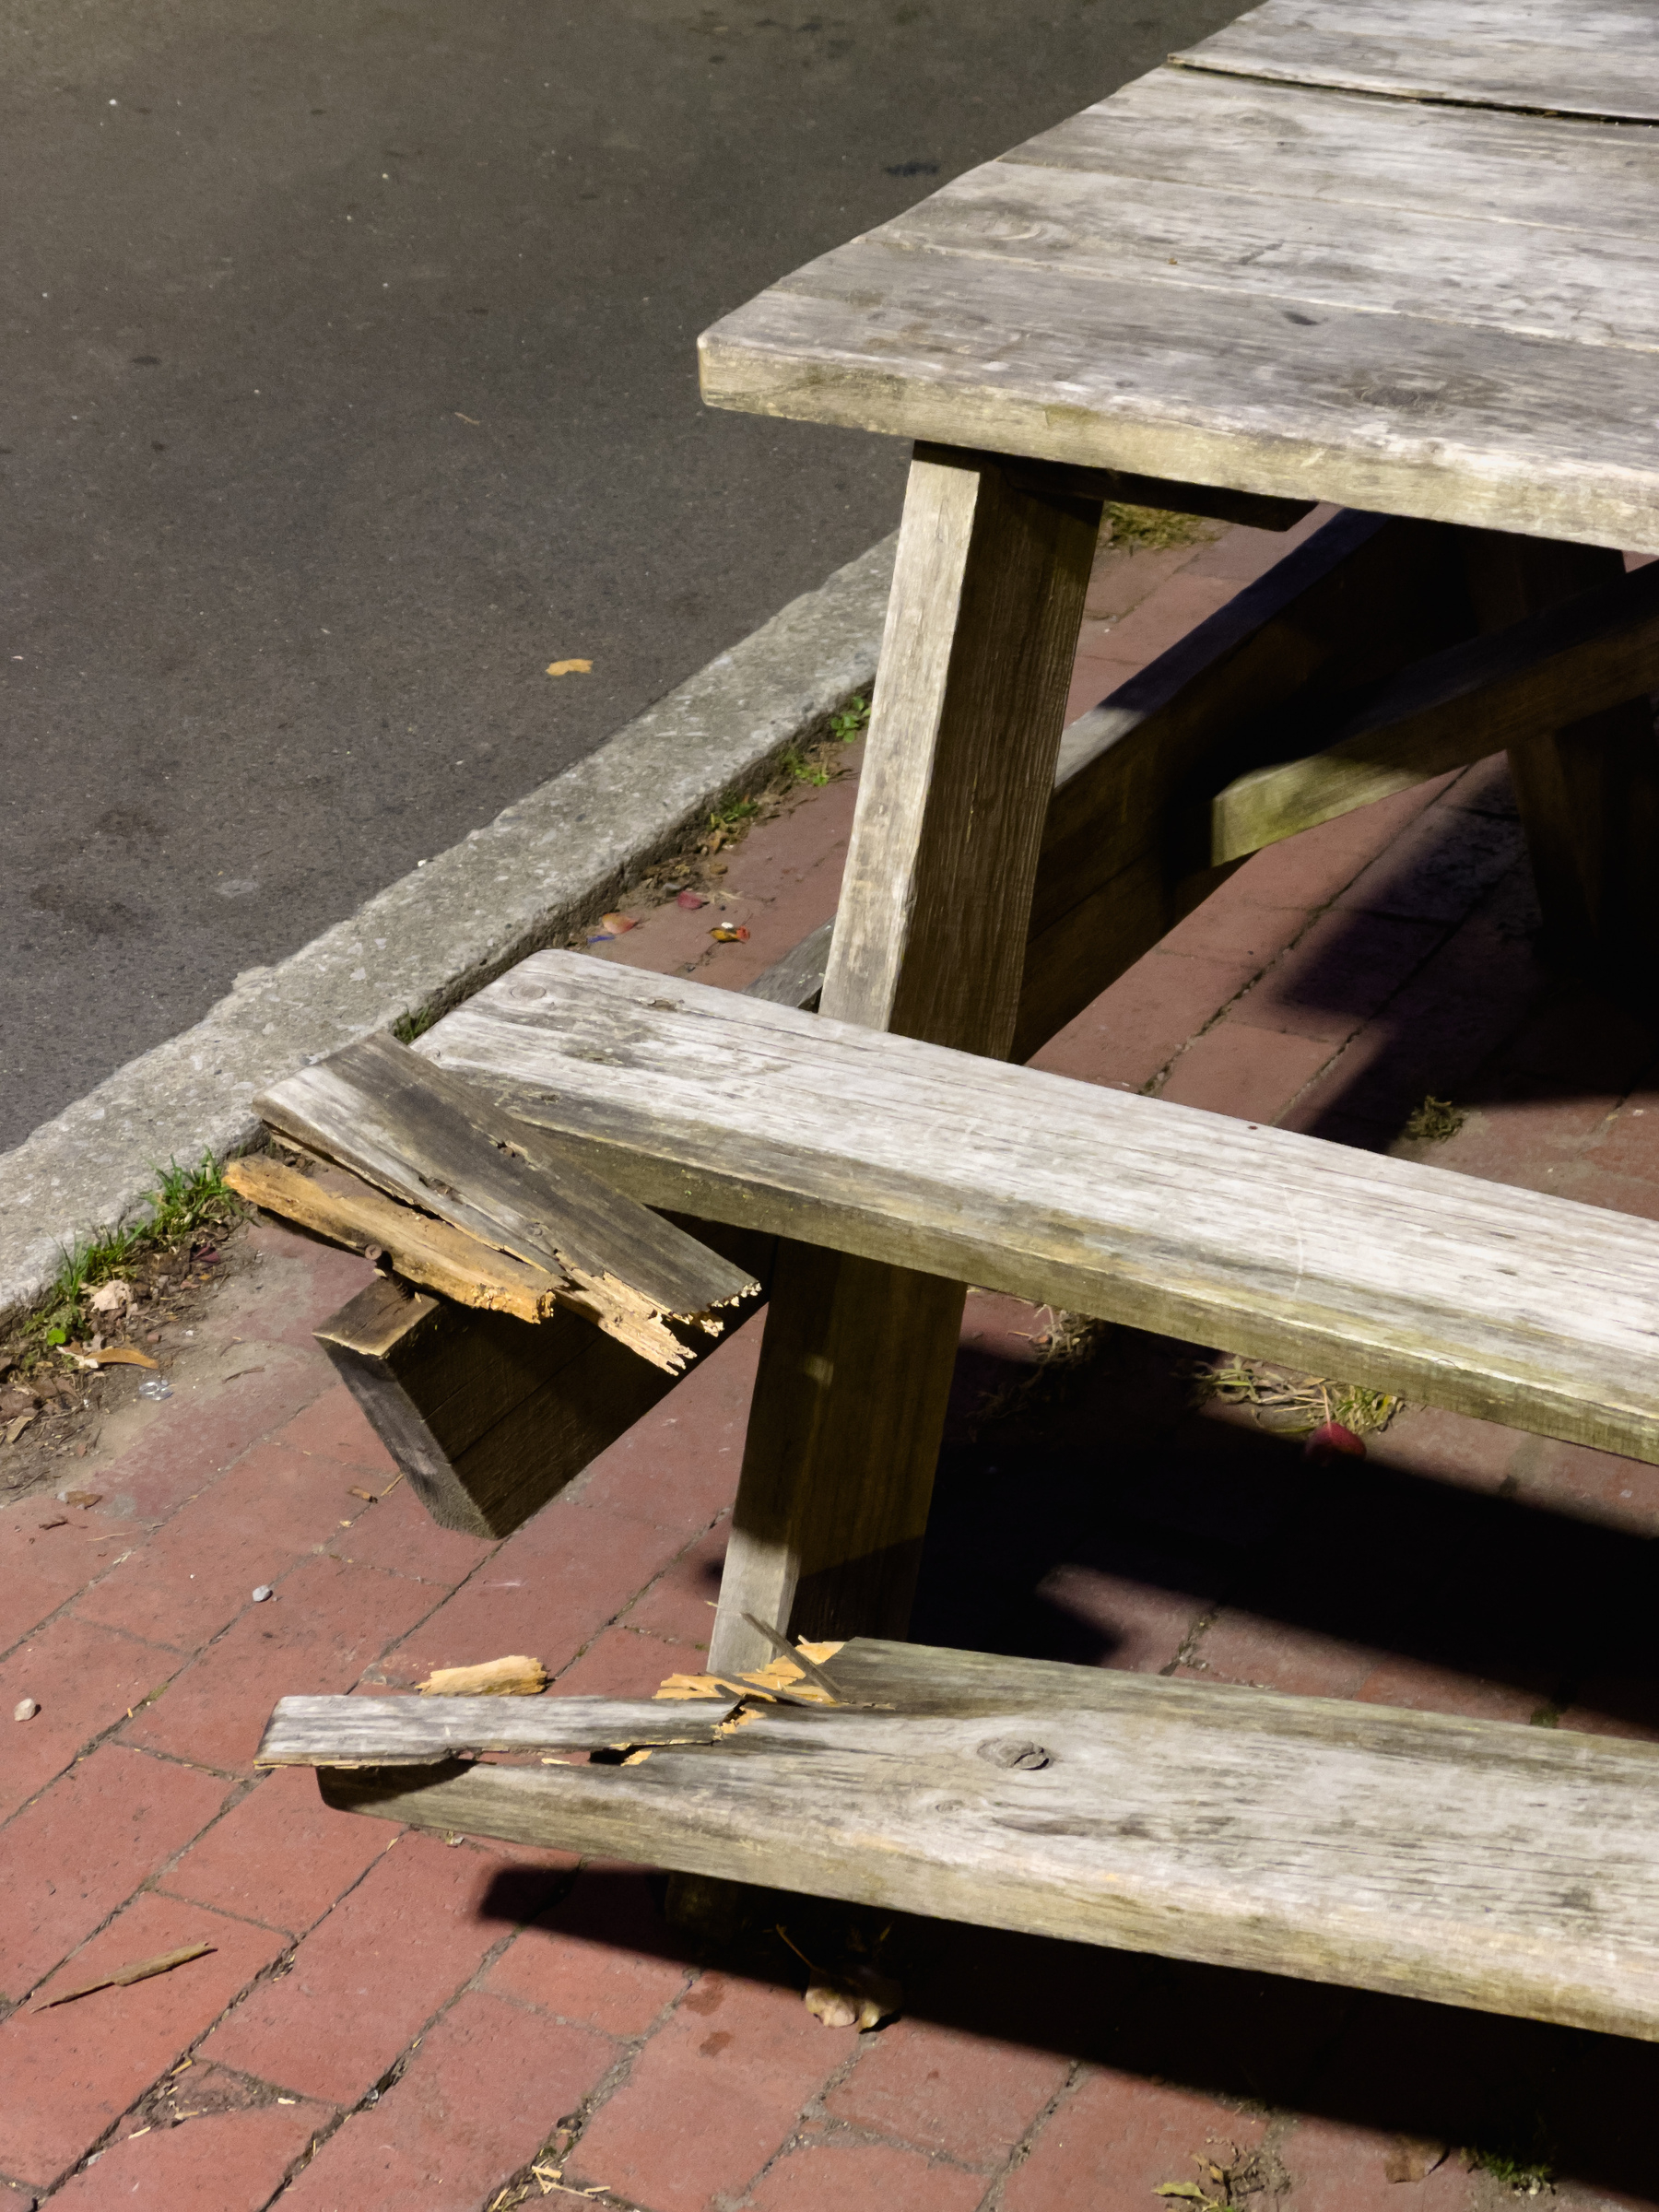 End of a picnic table with broken seat.